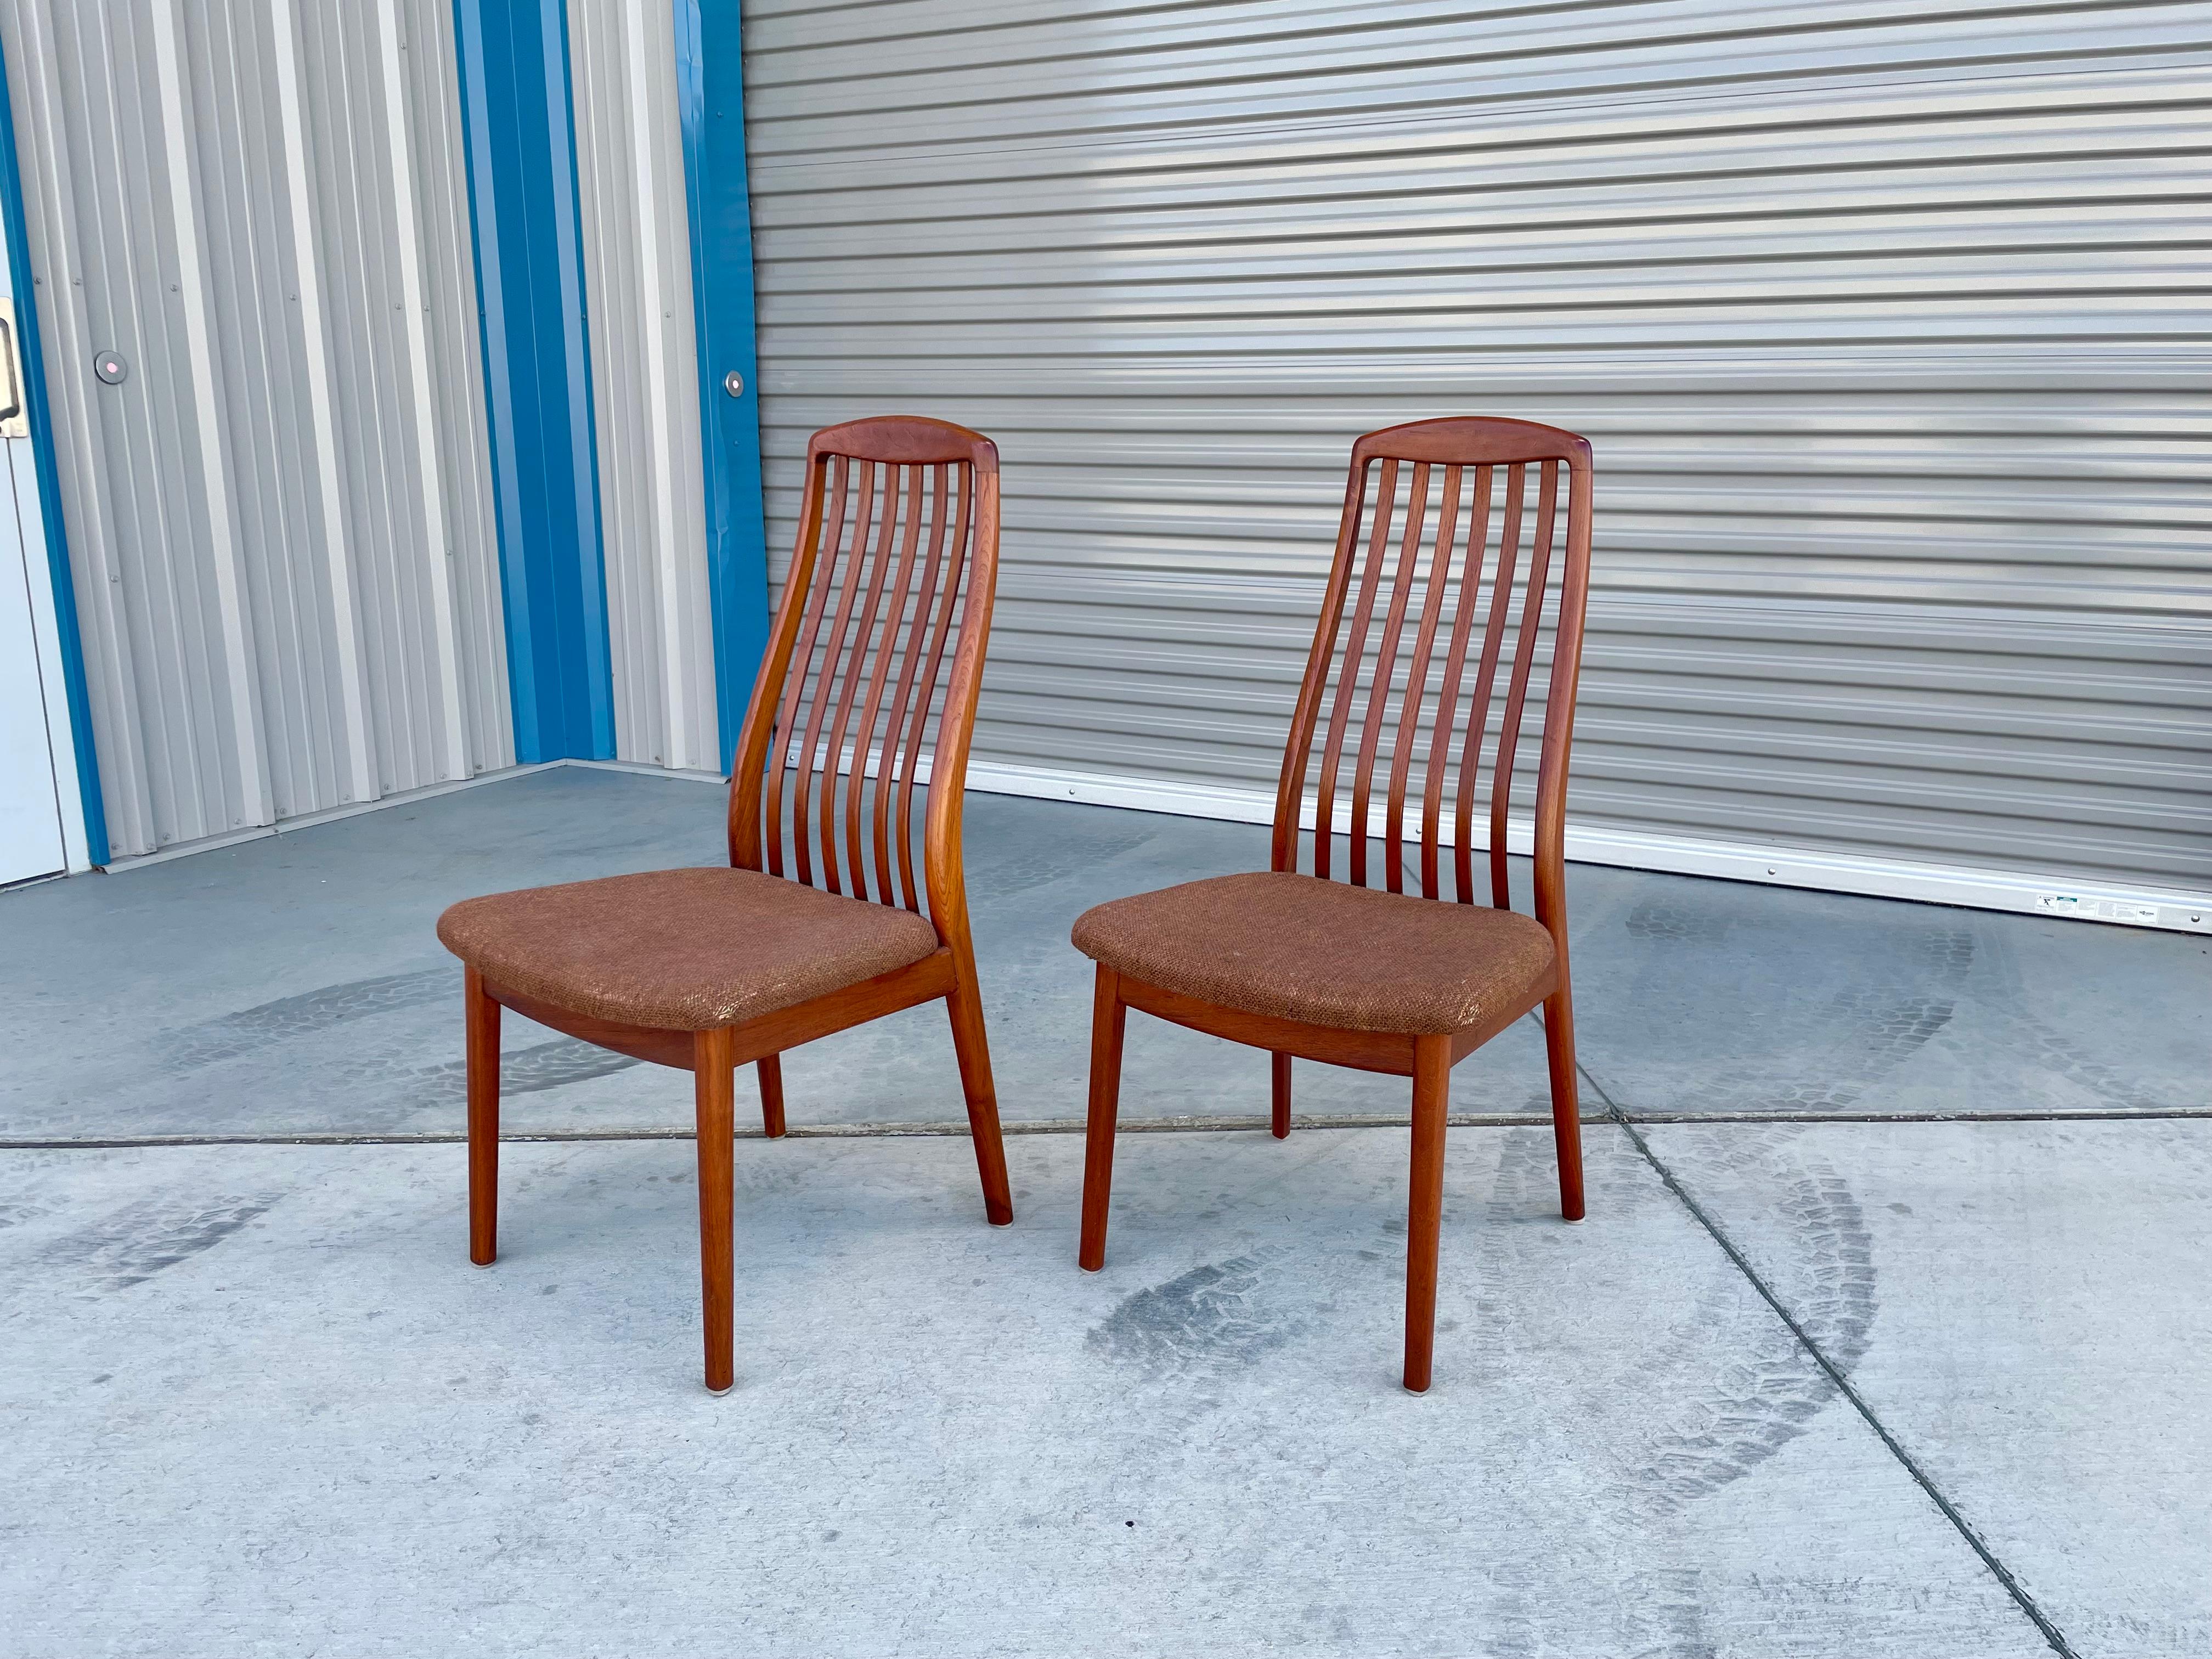 Late 20th Century 1970s Danish Modern Teak Dining Chairs by Preben-Schou - Set of 4 For Sale